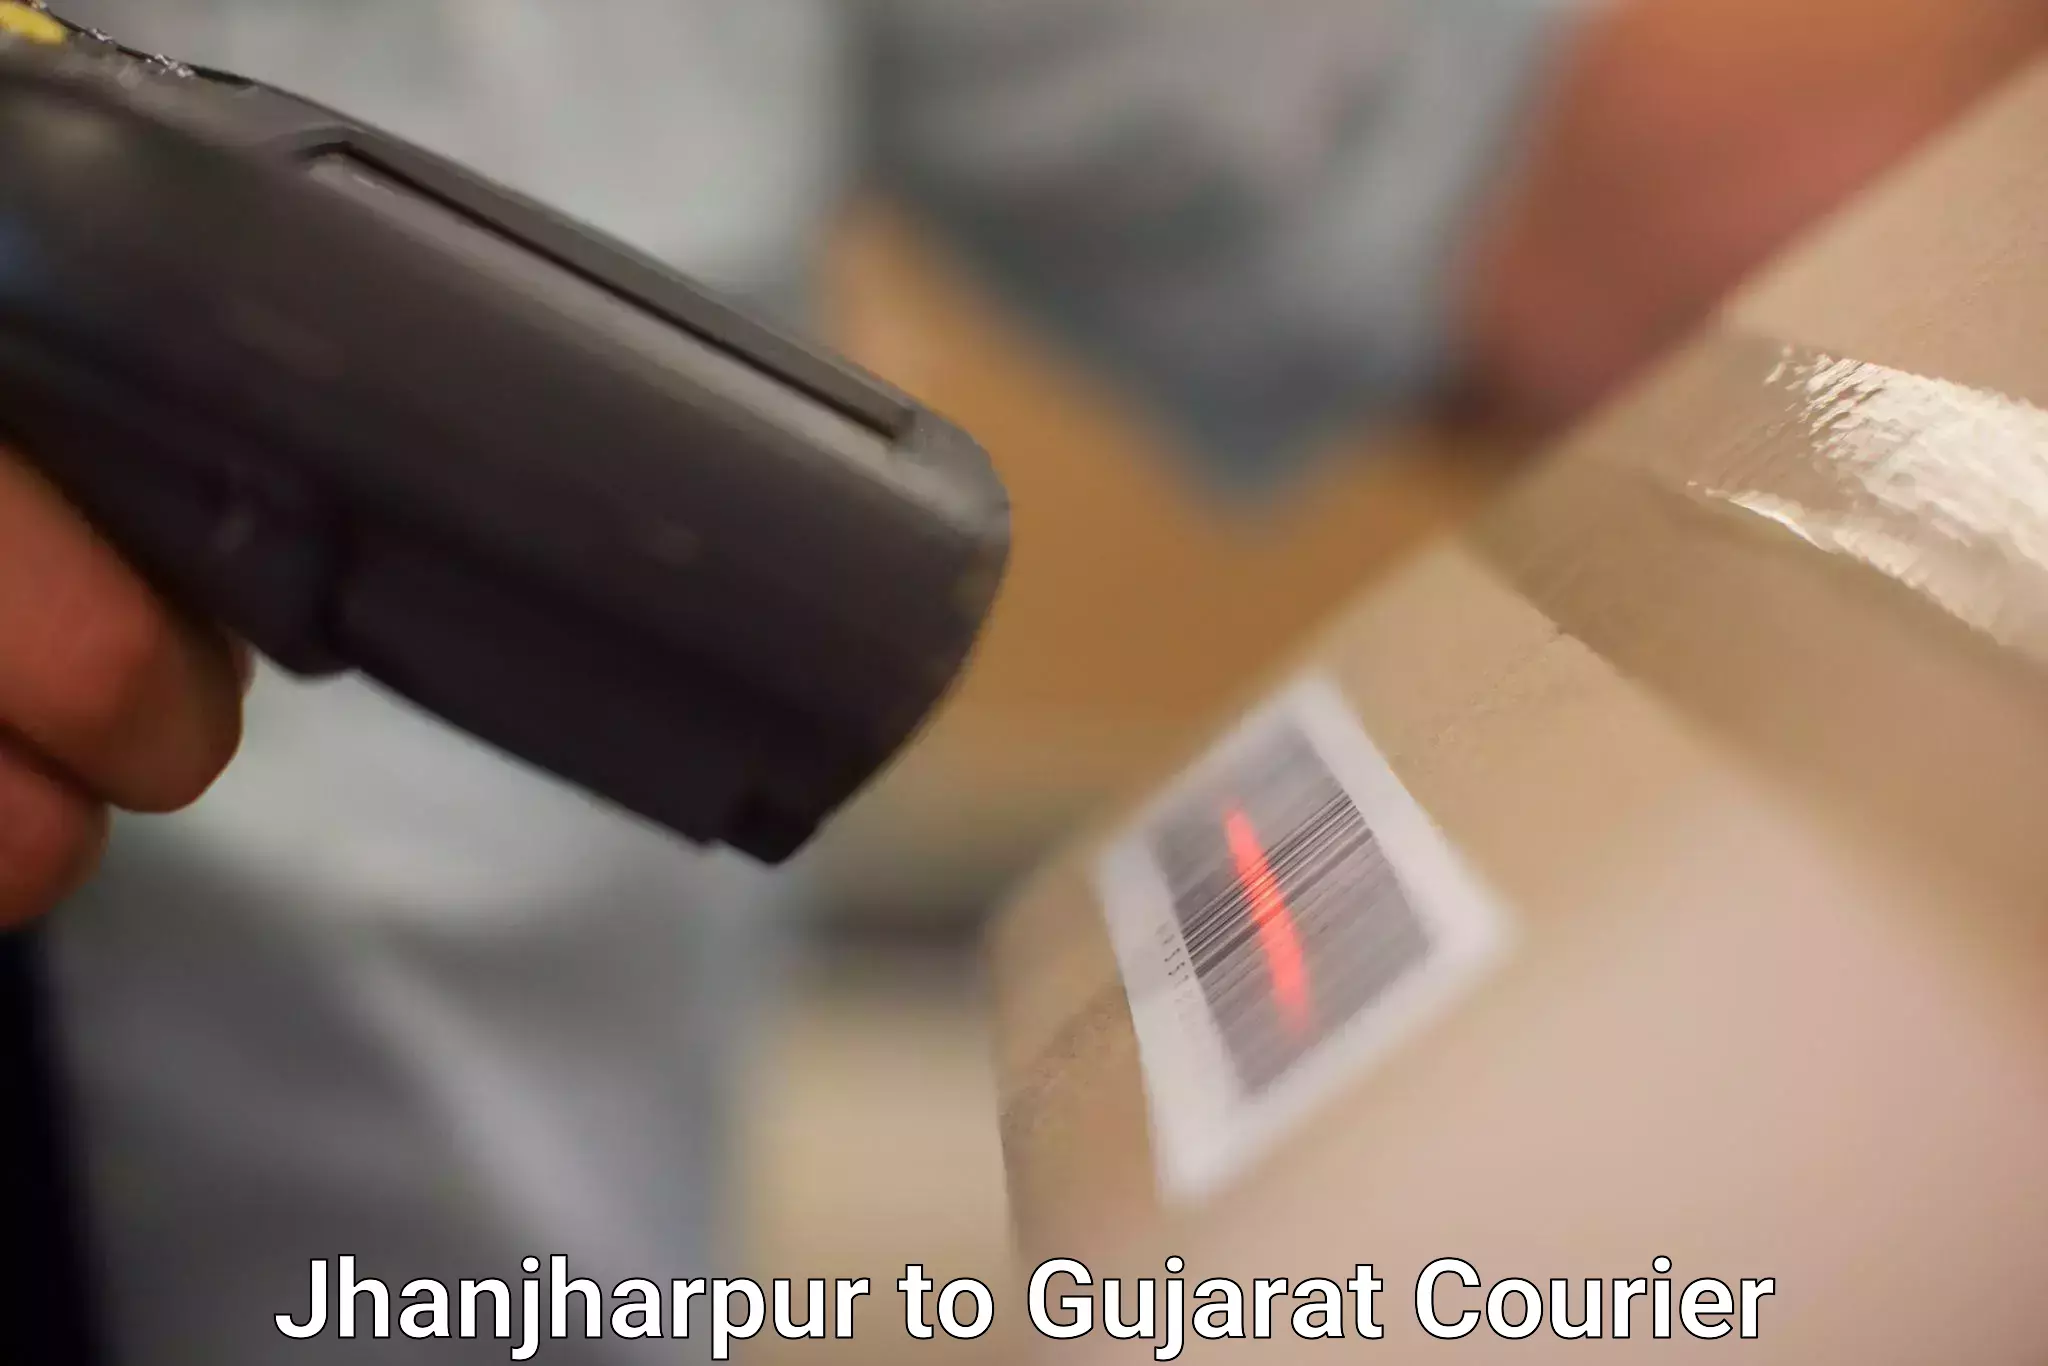 Simplified shipping solutions in Jhanjharpur to GIDC